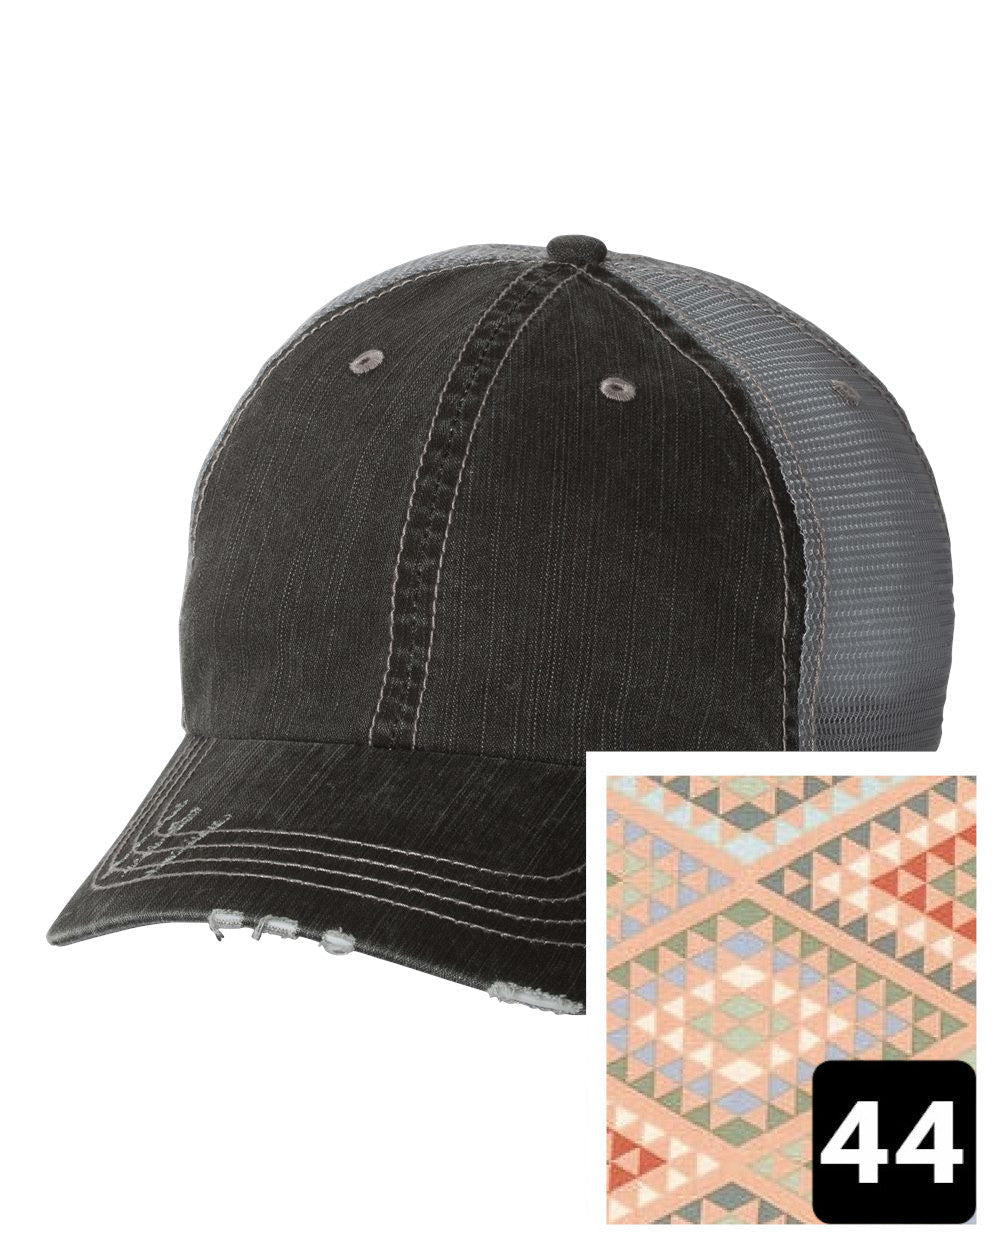 gray distressed trucker hat with navy coral and white chevron fabric state of Delaware